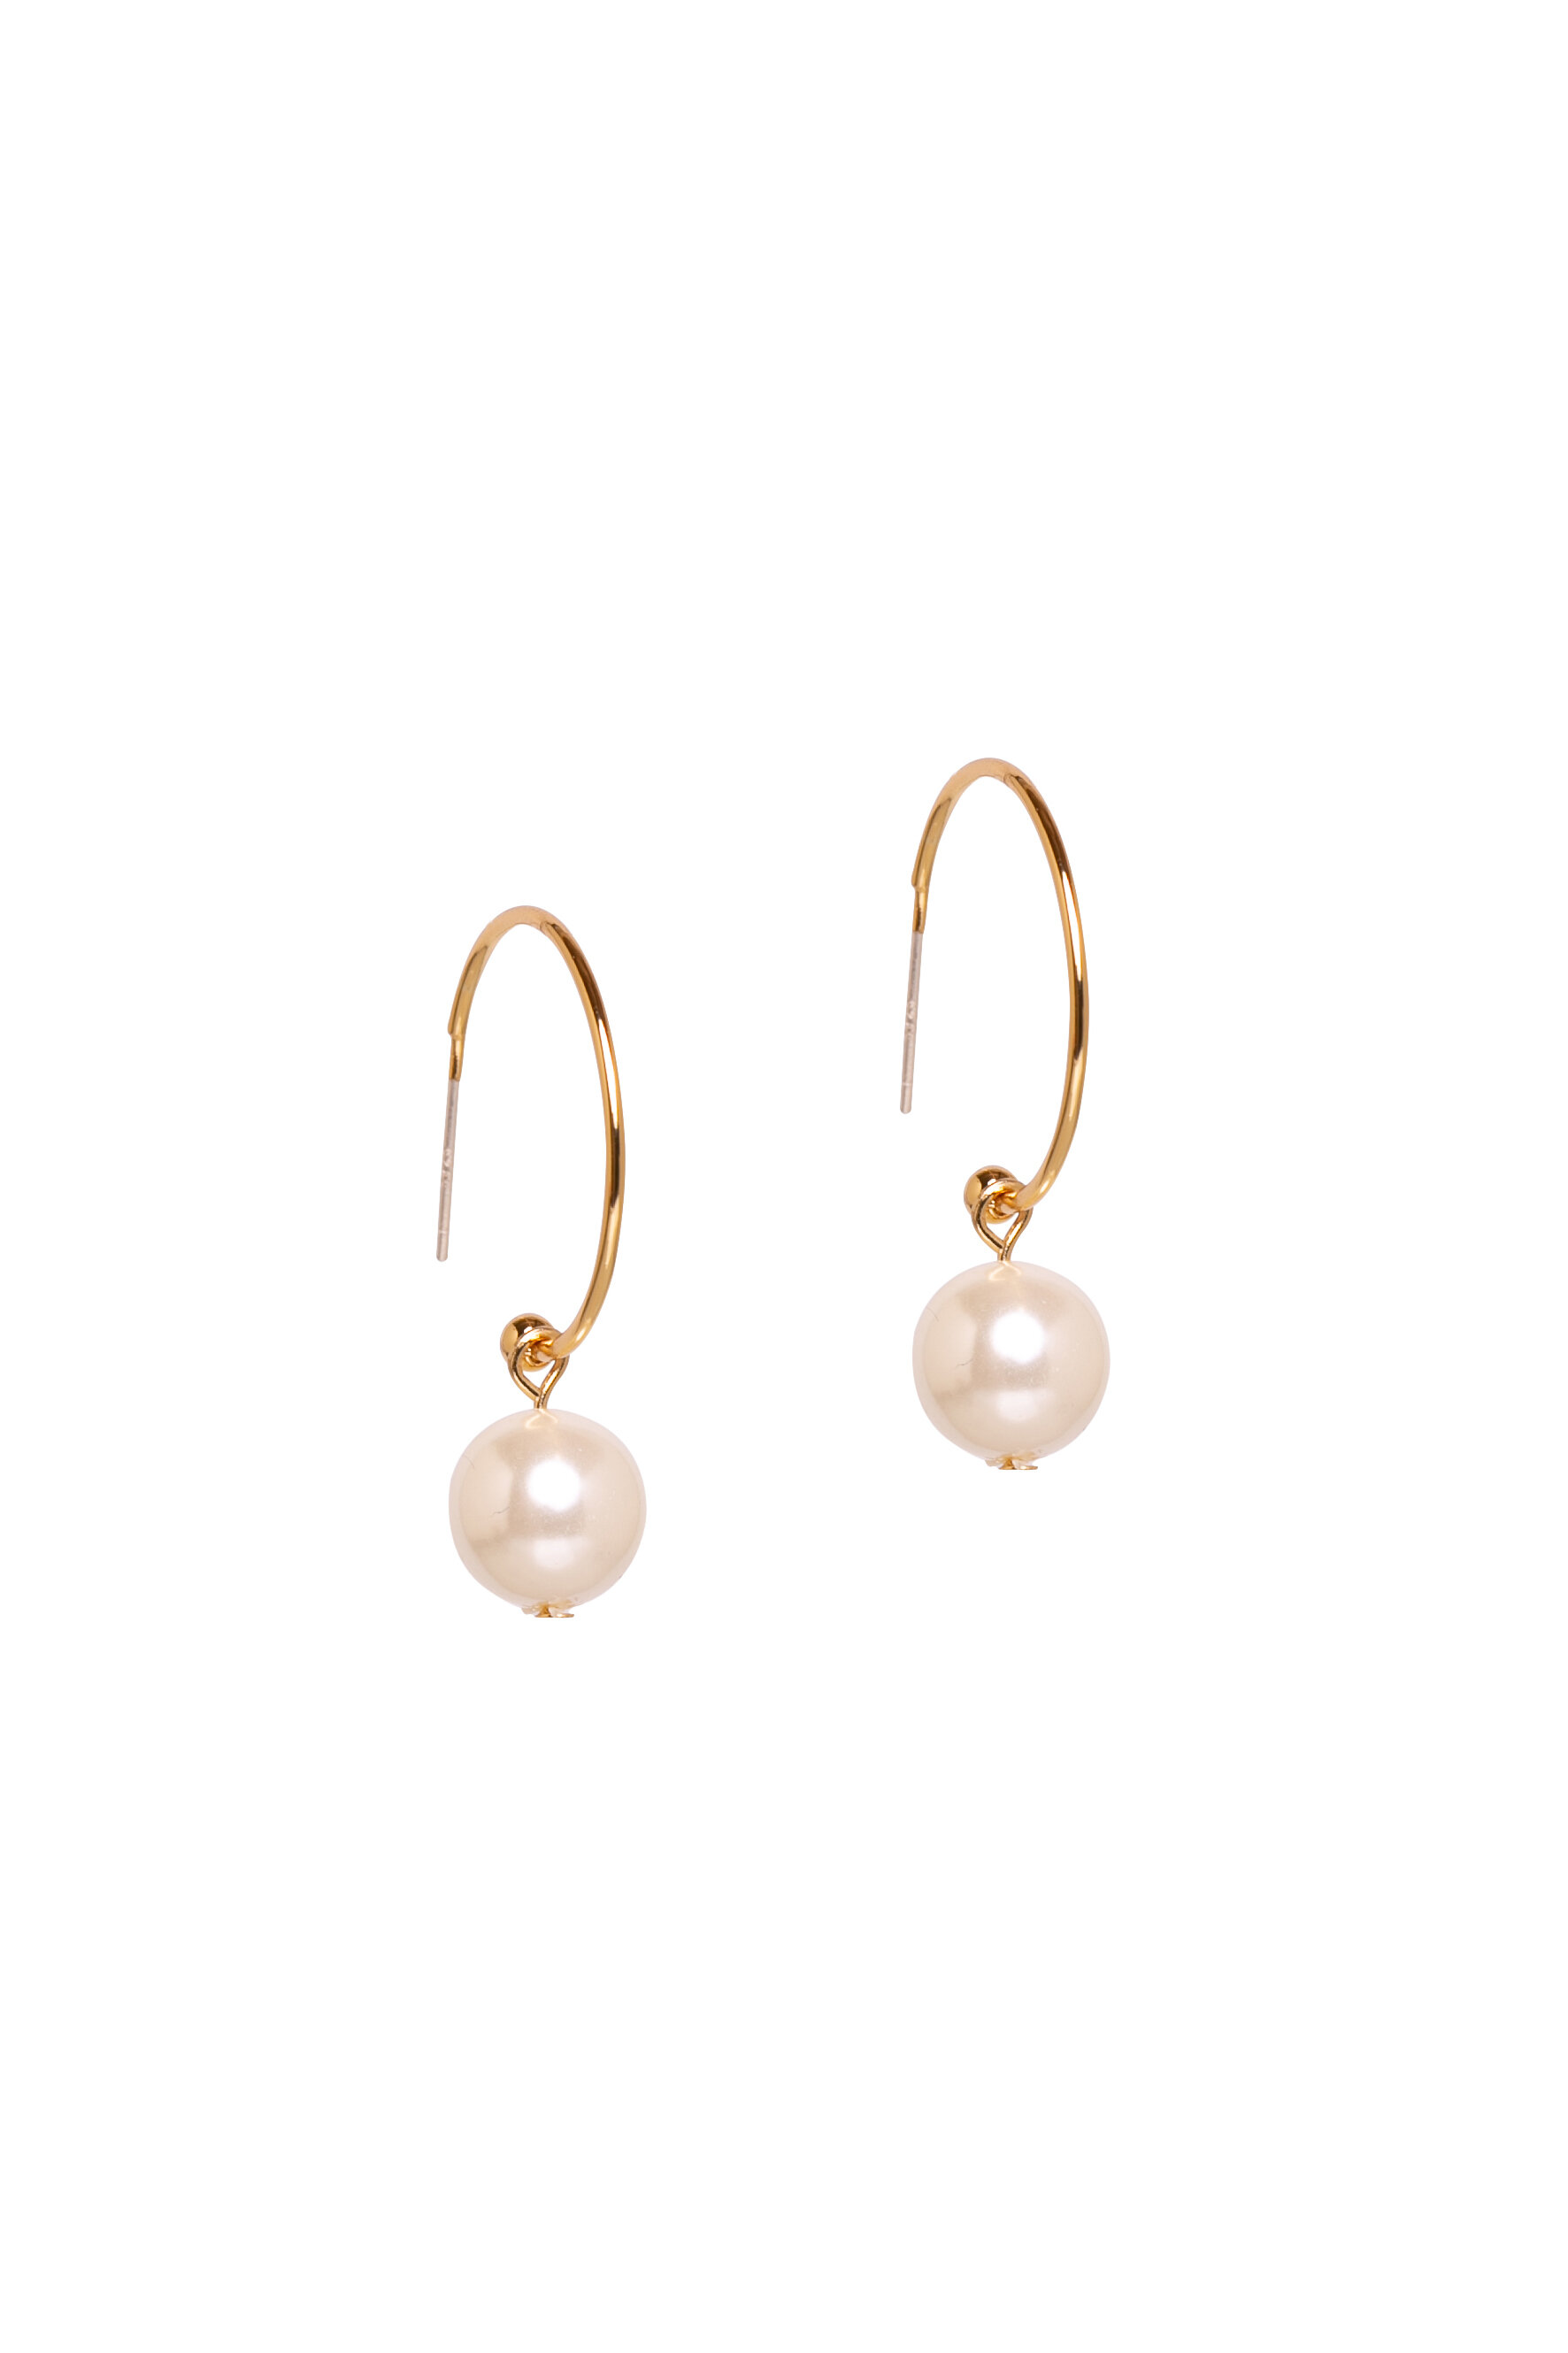 Small (20mm) Gold Plated Hoops with Pearl Charm.jpg